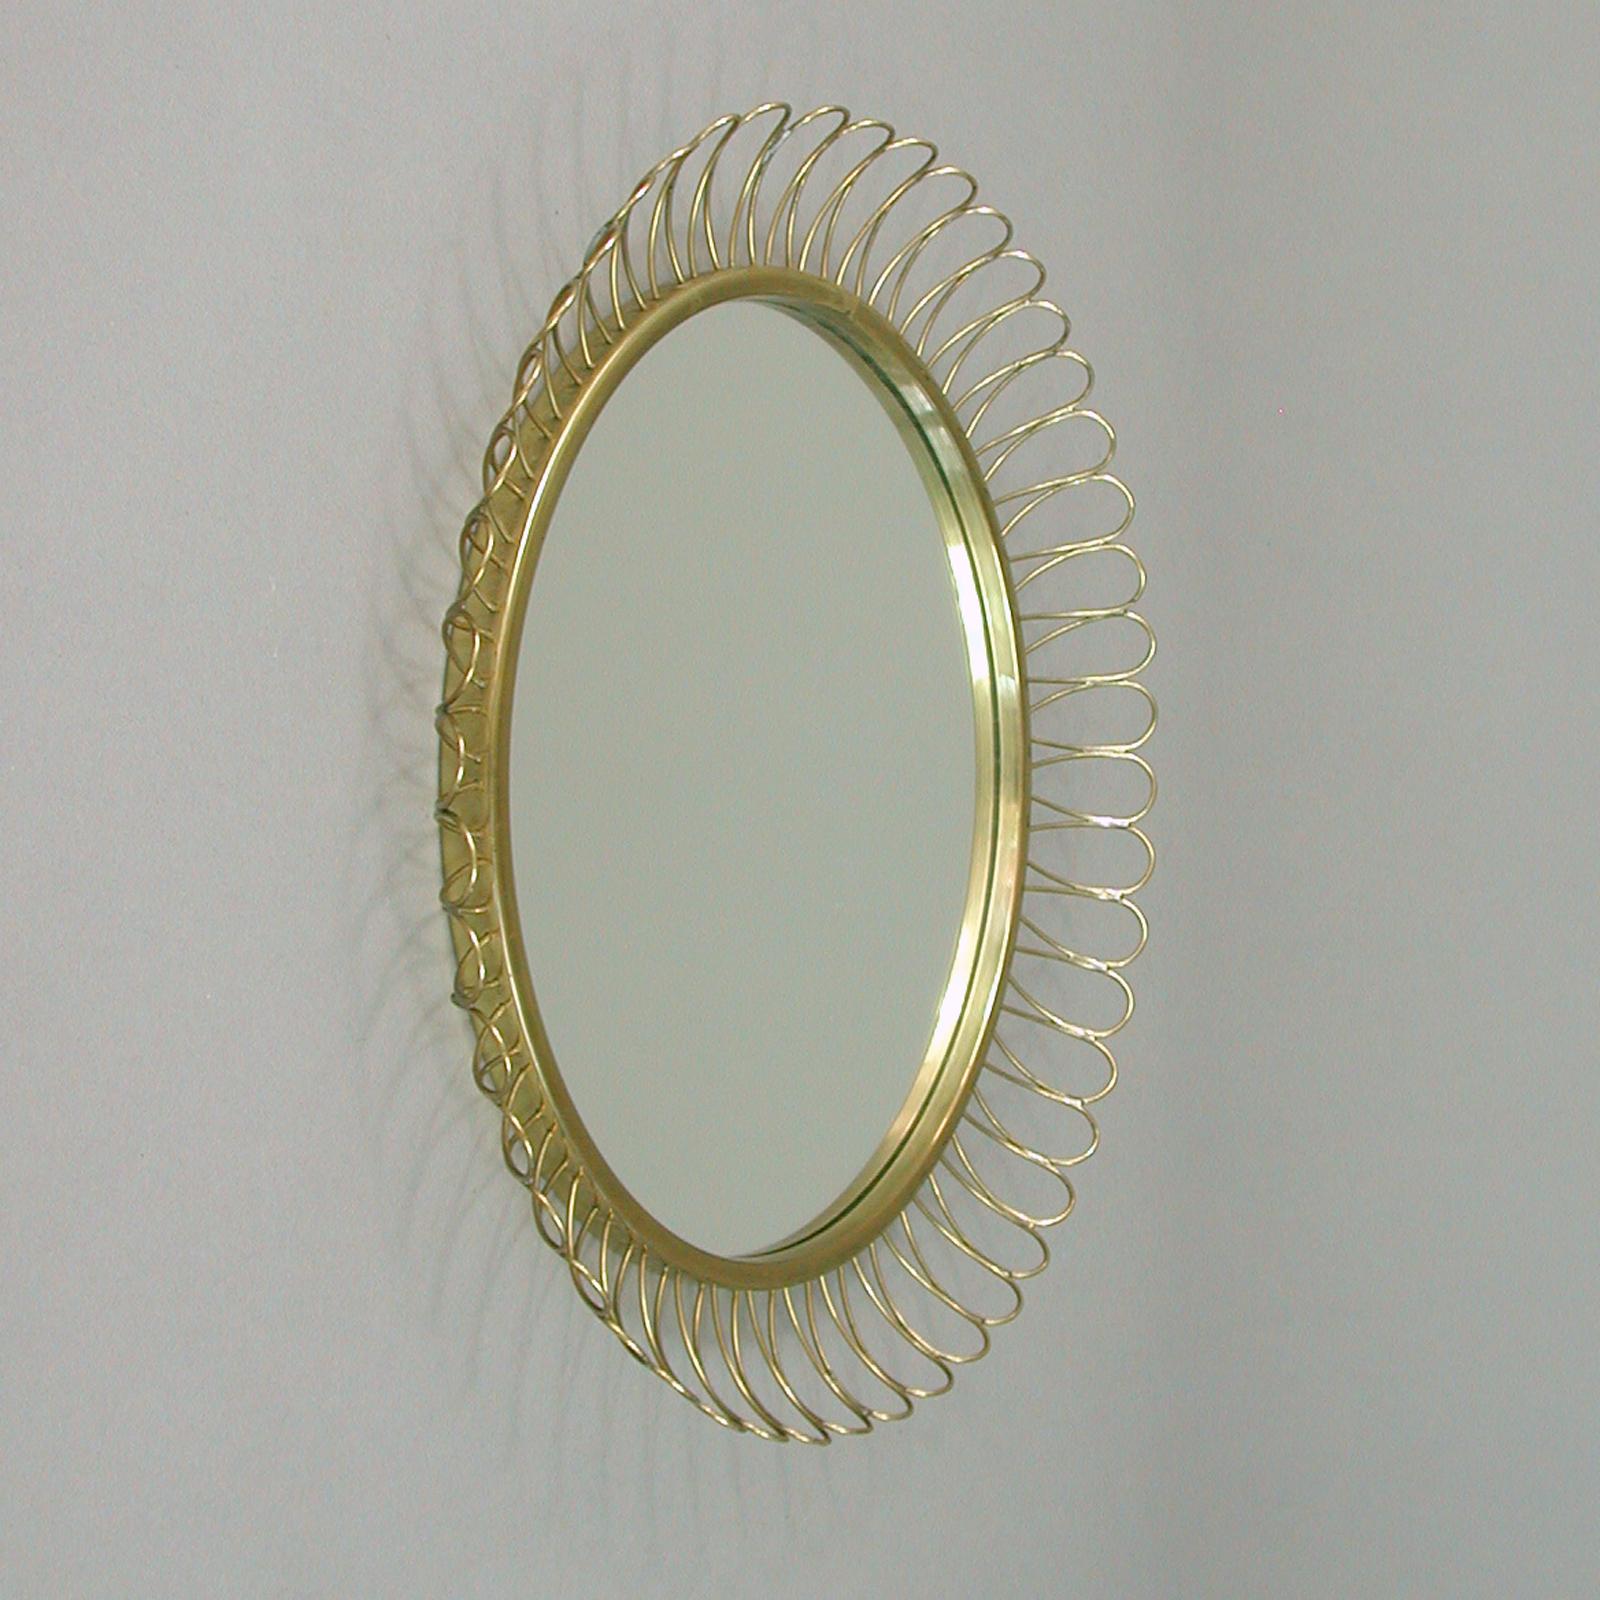 Plated Midcentury Sculptural Round Brass Wall Mirror, Sweden, 1950s For Sale